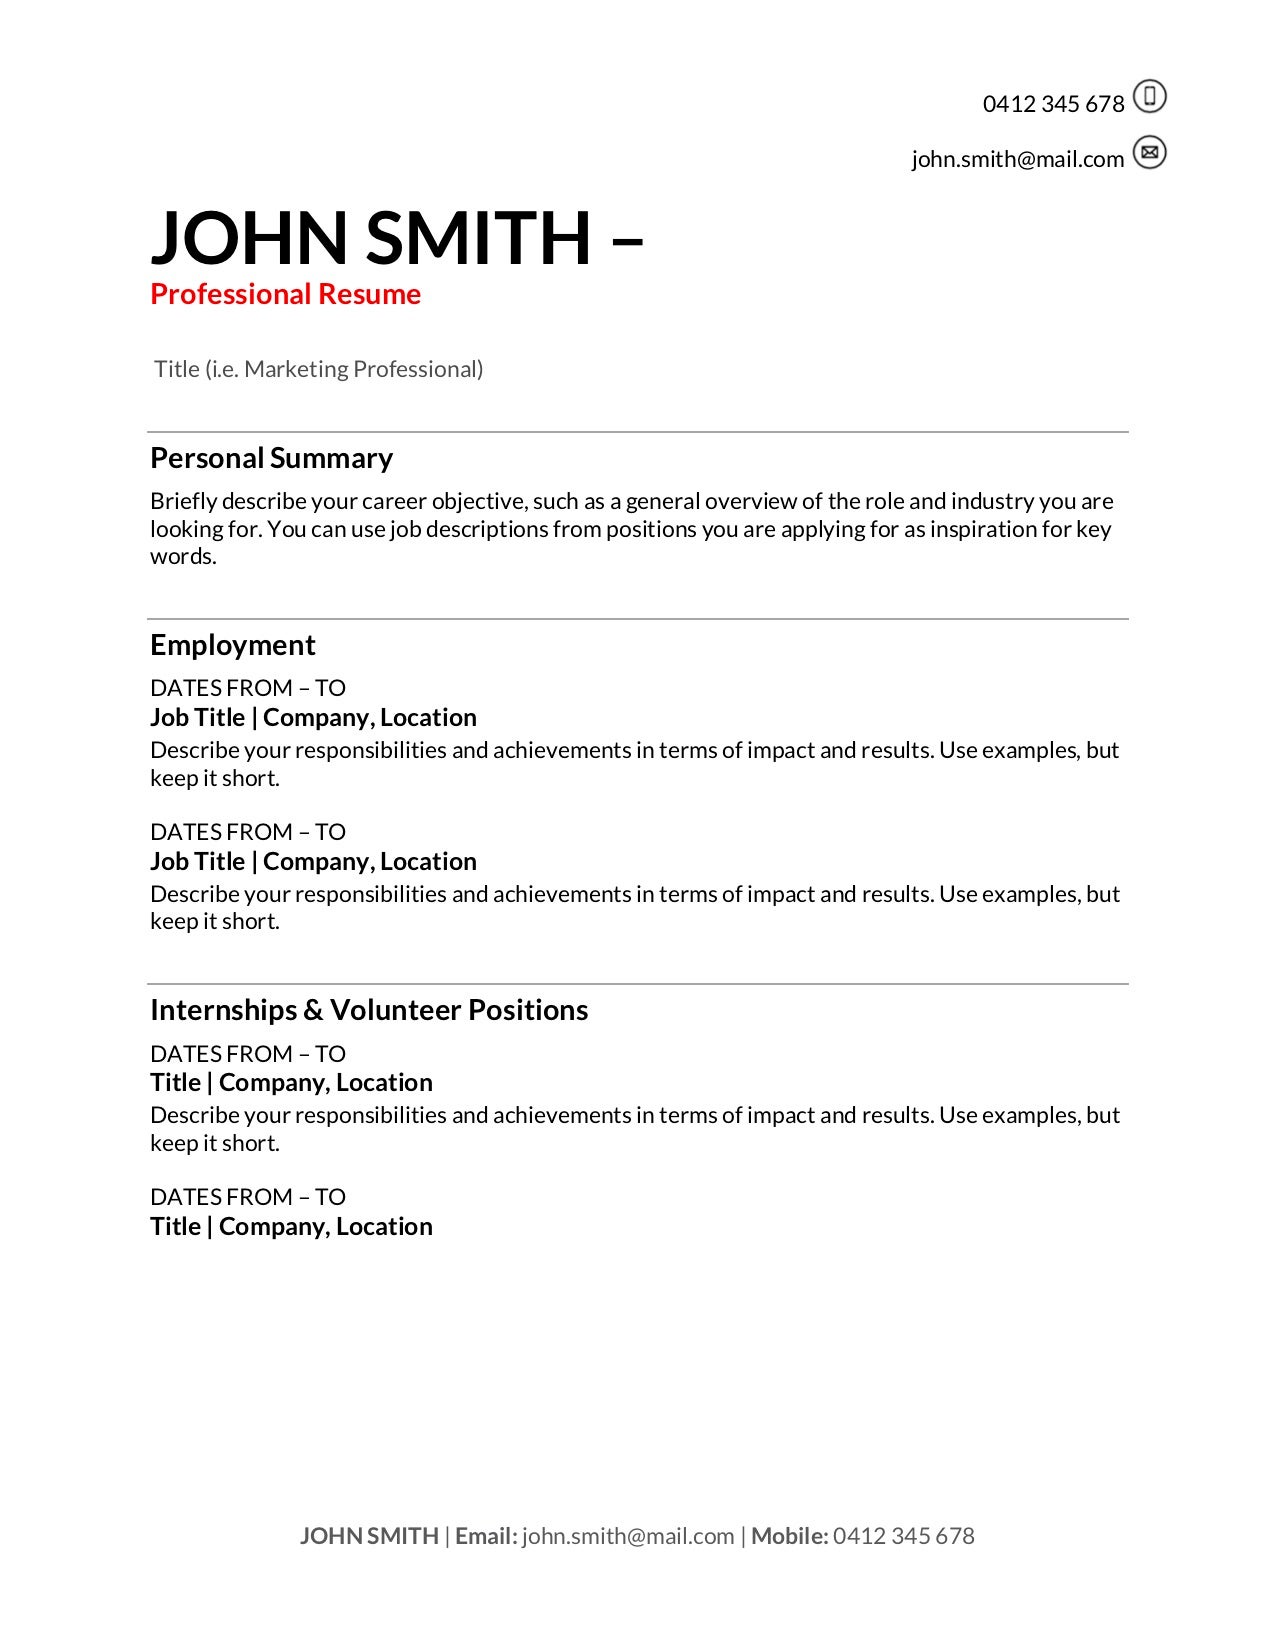 creative resume templates all languages for free download